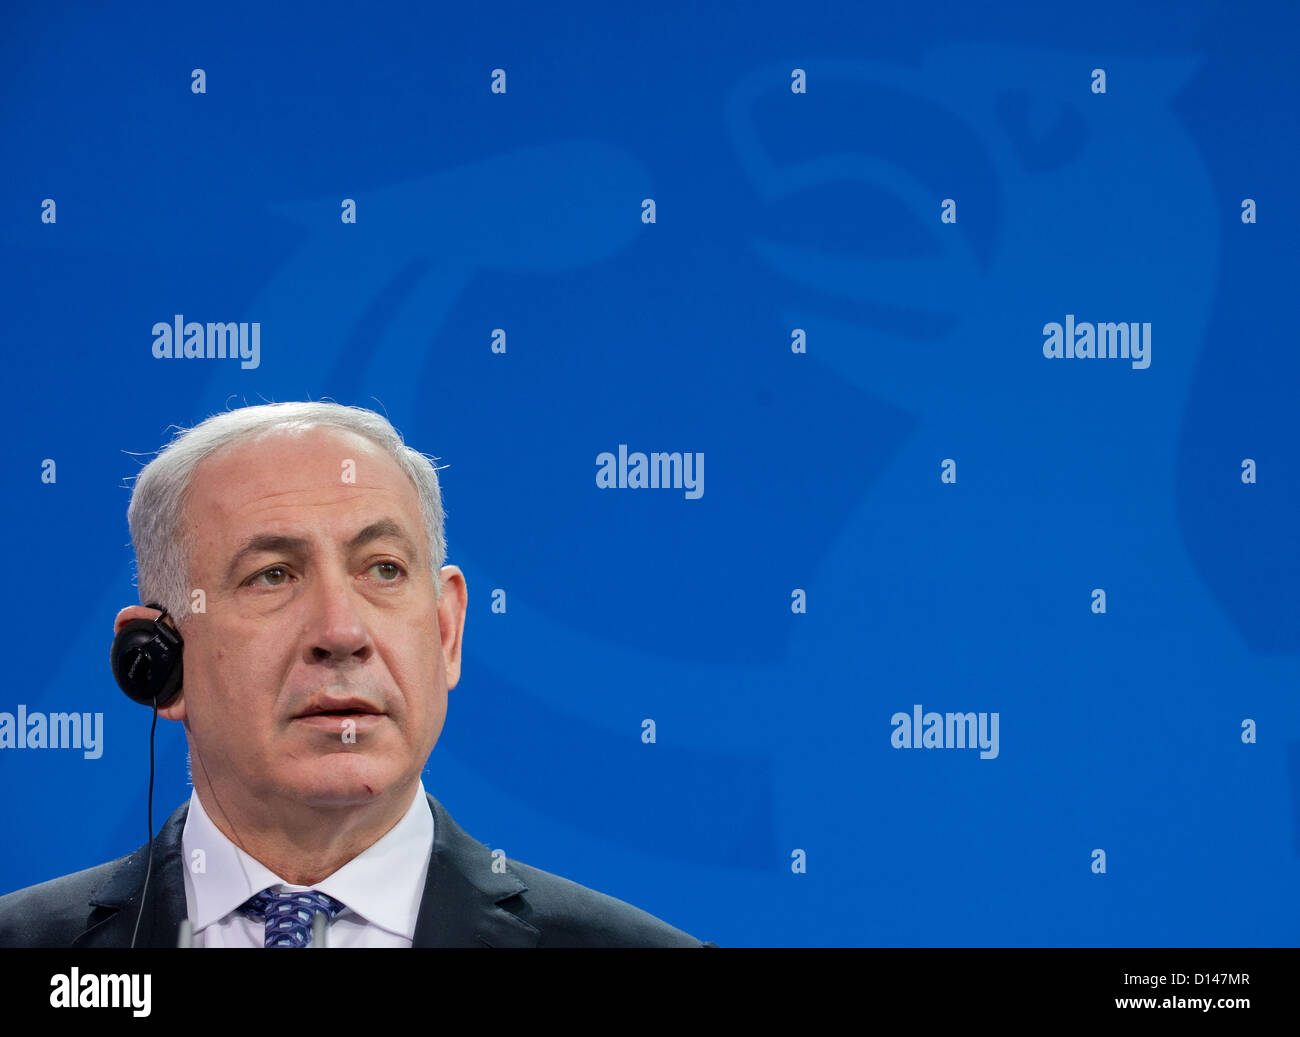 Israeli Prime Minister Benjamin Netanyahu gives a press conference at the chancellery in Berlin, Germany, 06 December 2012. Netanyahu's visit to Germany is overshadowed by Israel's plans to build new settler homes in a highly contentious strip of the occupied West Bank near Jerusalem. Photo: TIM BRAKEMEIER Stock Photo